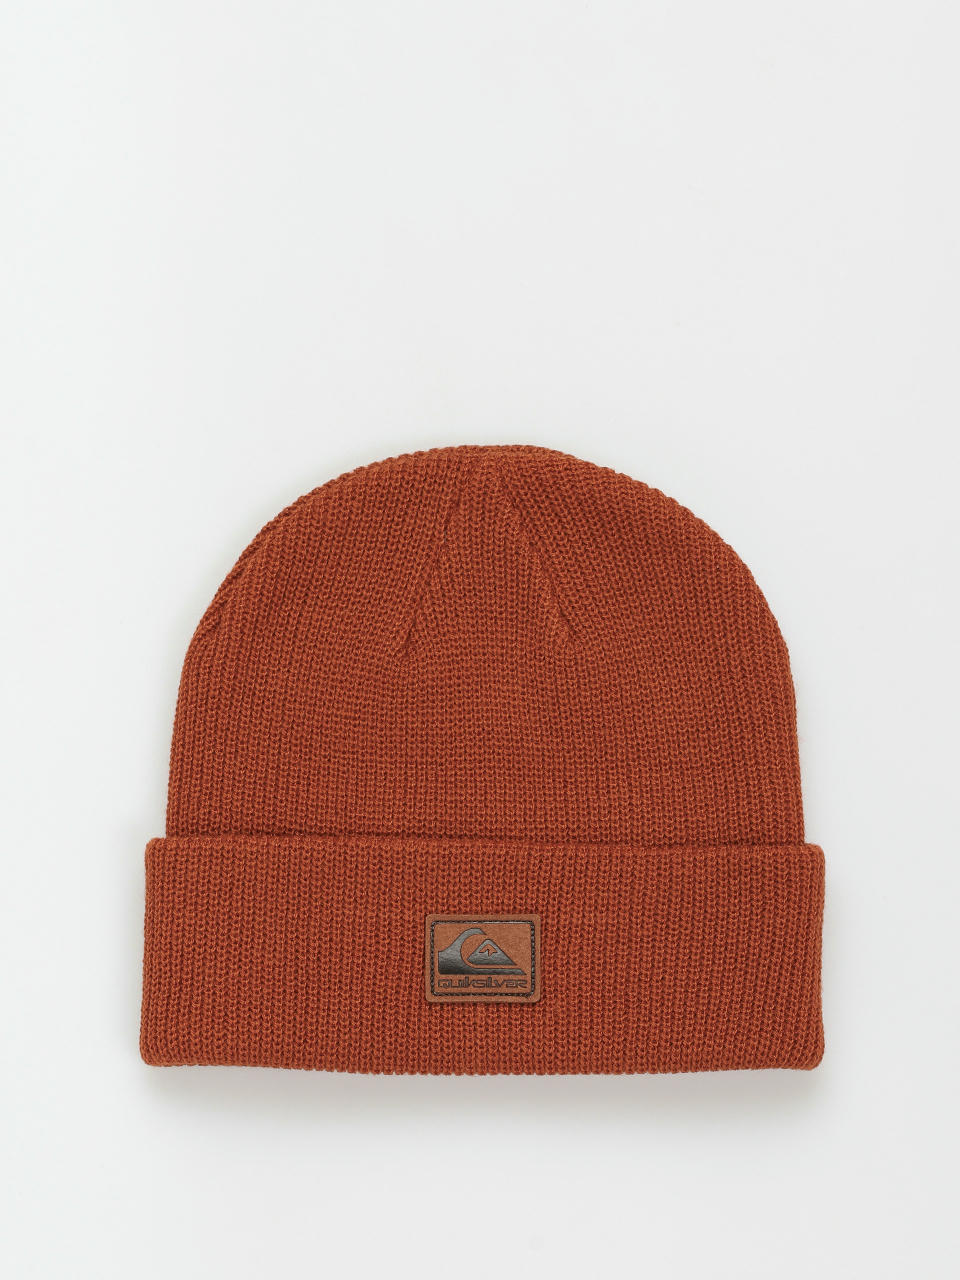 Quiksilver Performer 2 Beanie (baked clay)